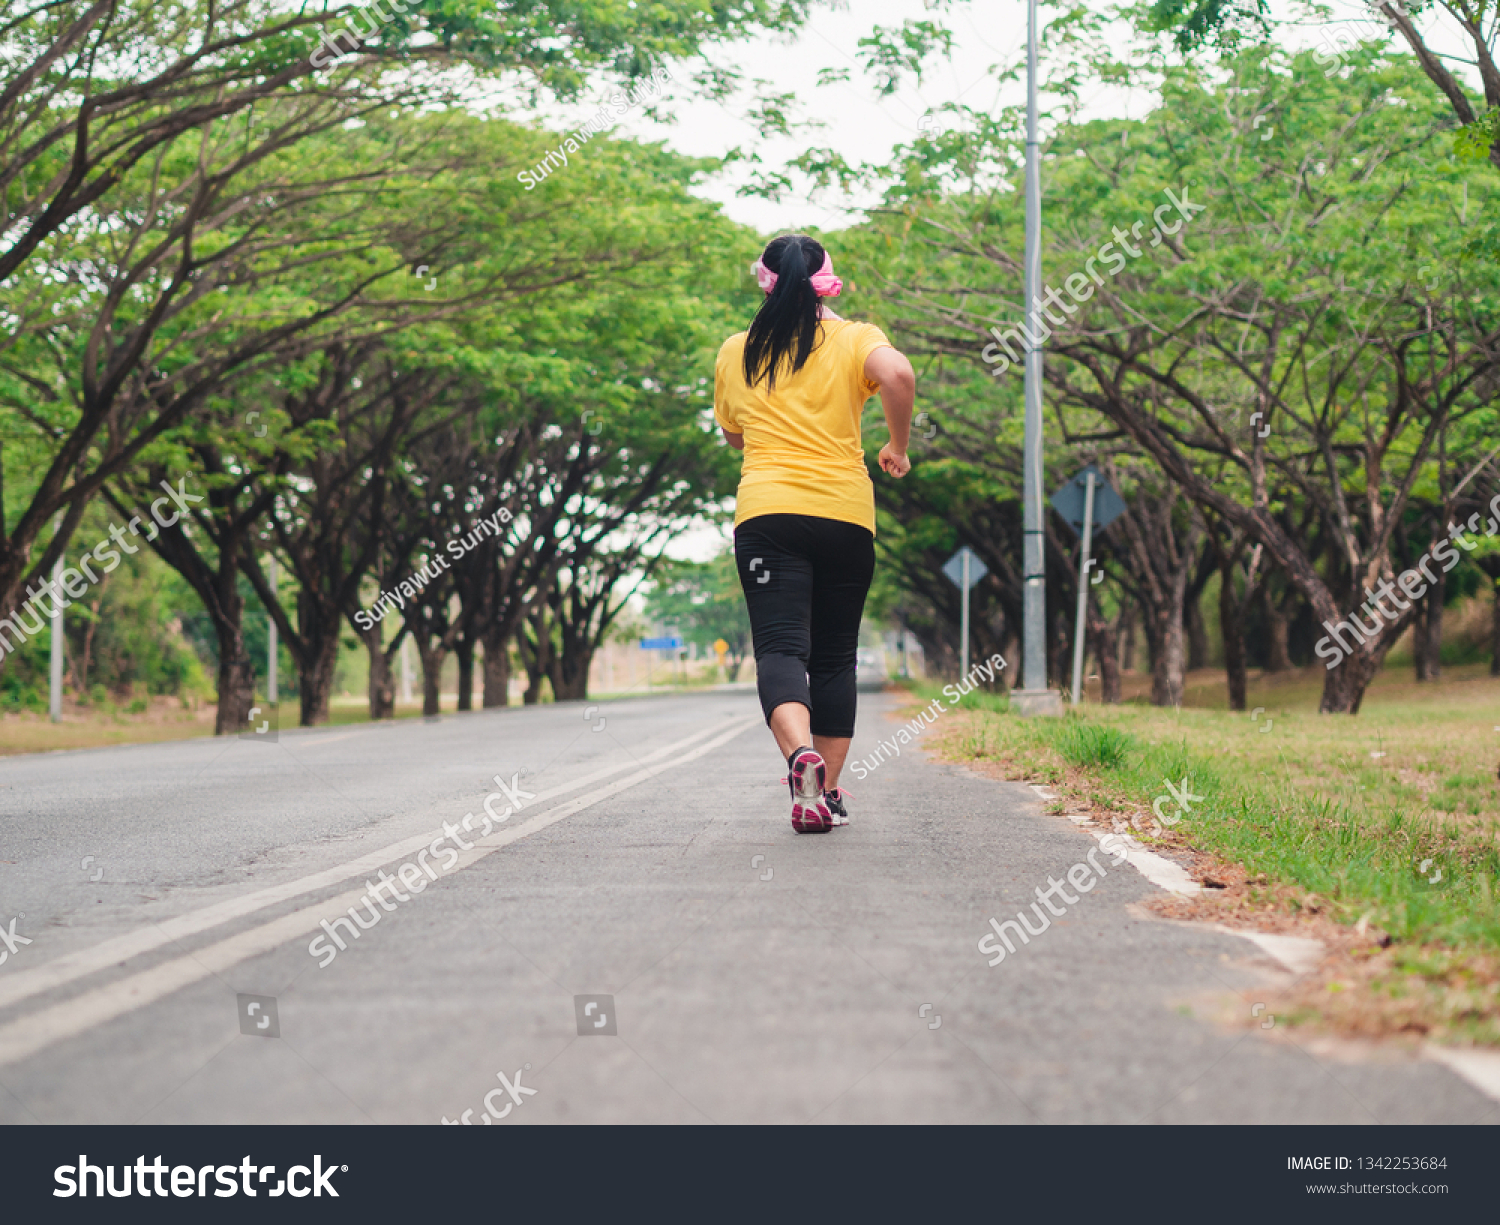 Overweight woman running in the park. Weight loss concept #1342253684